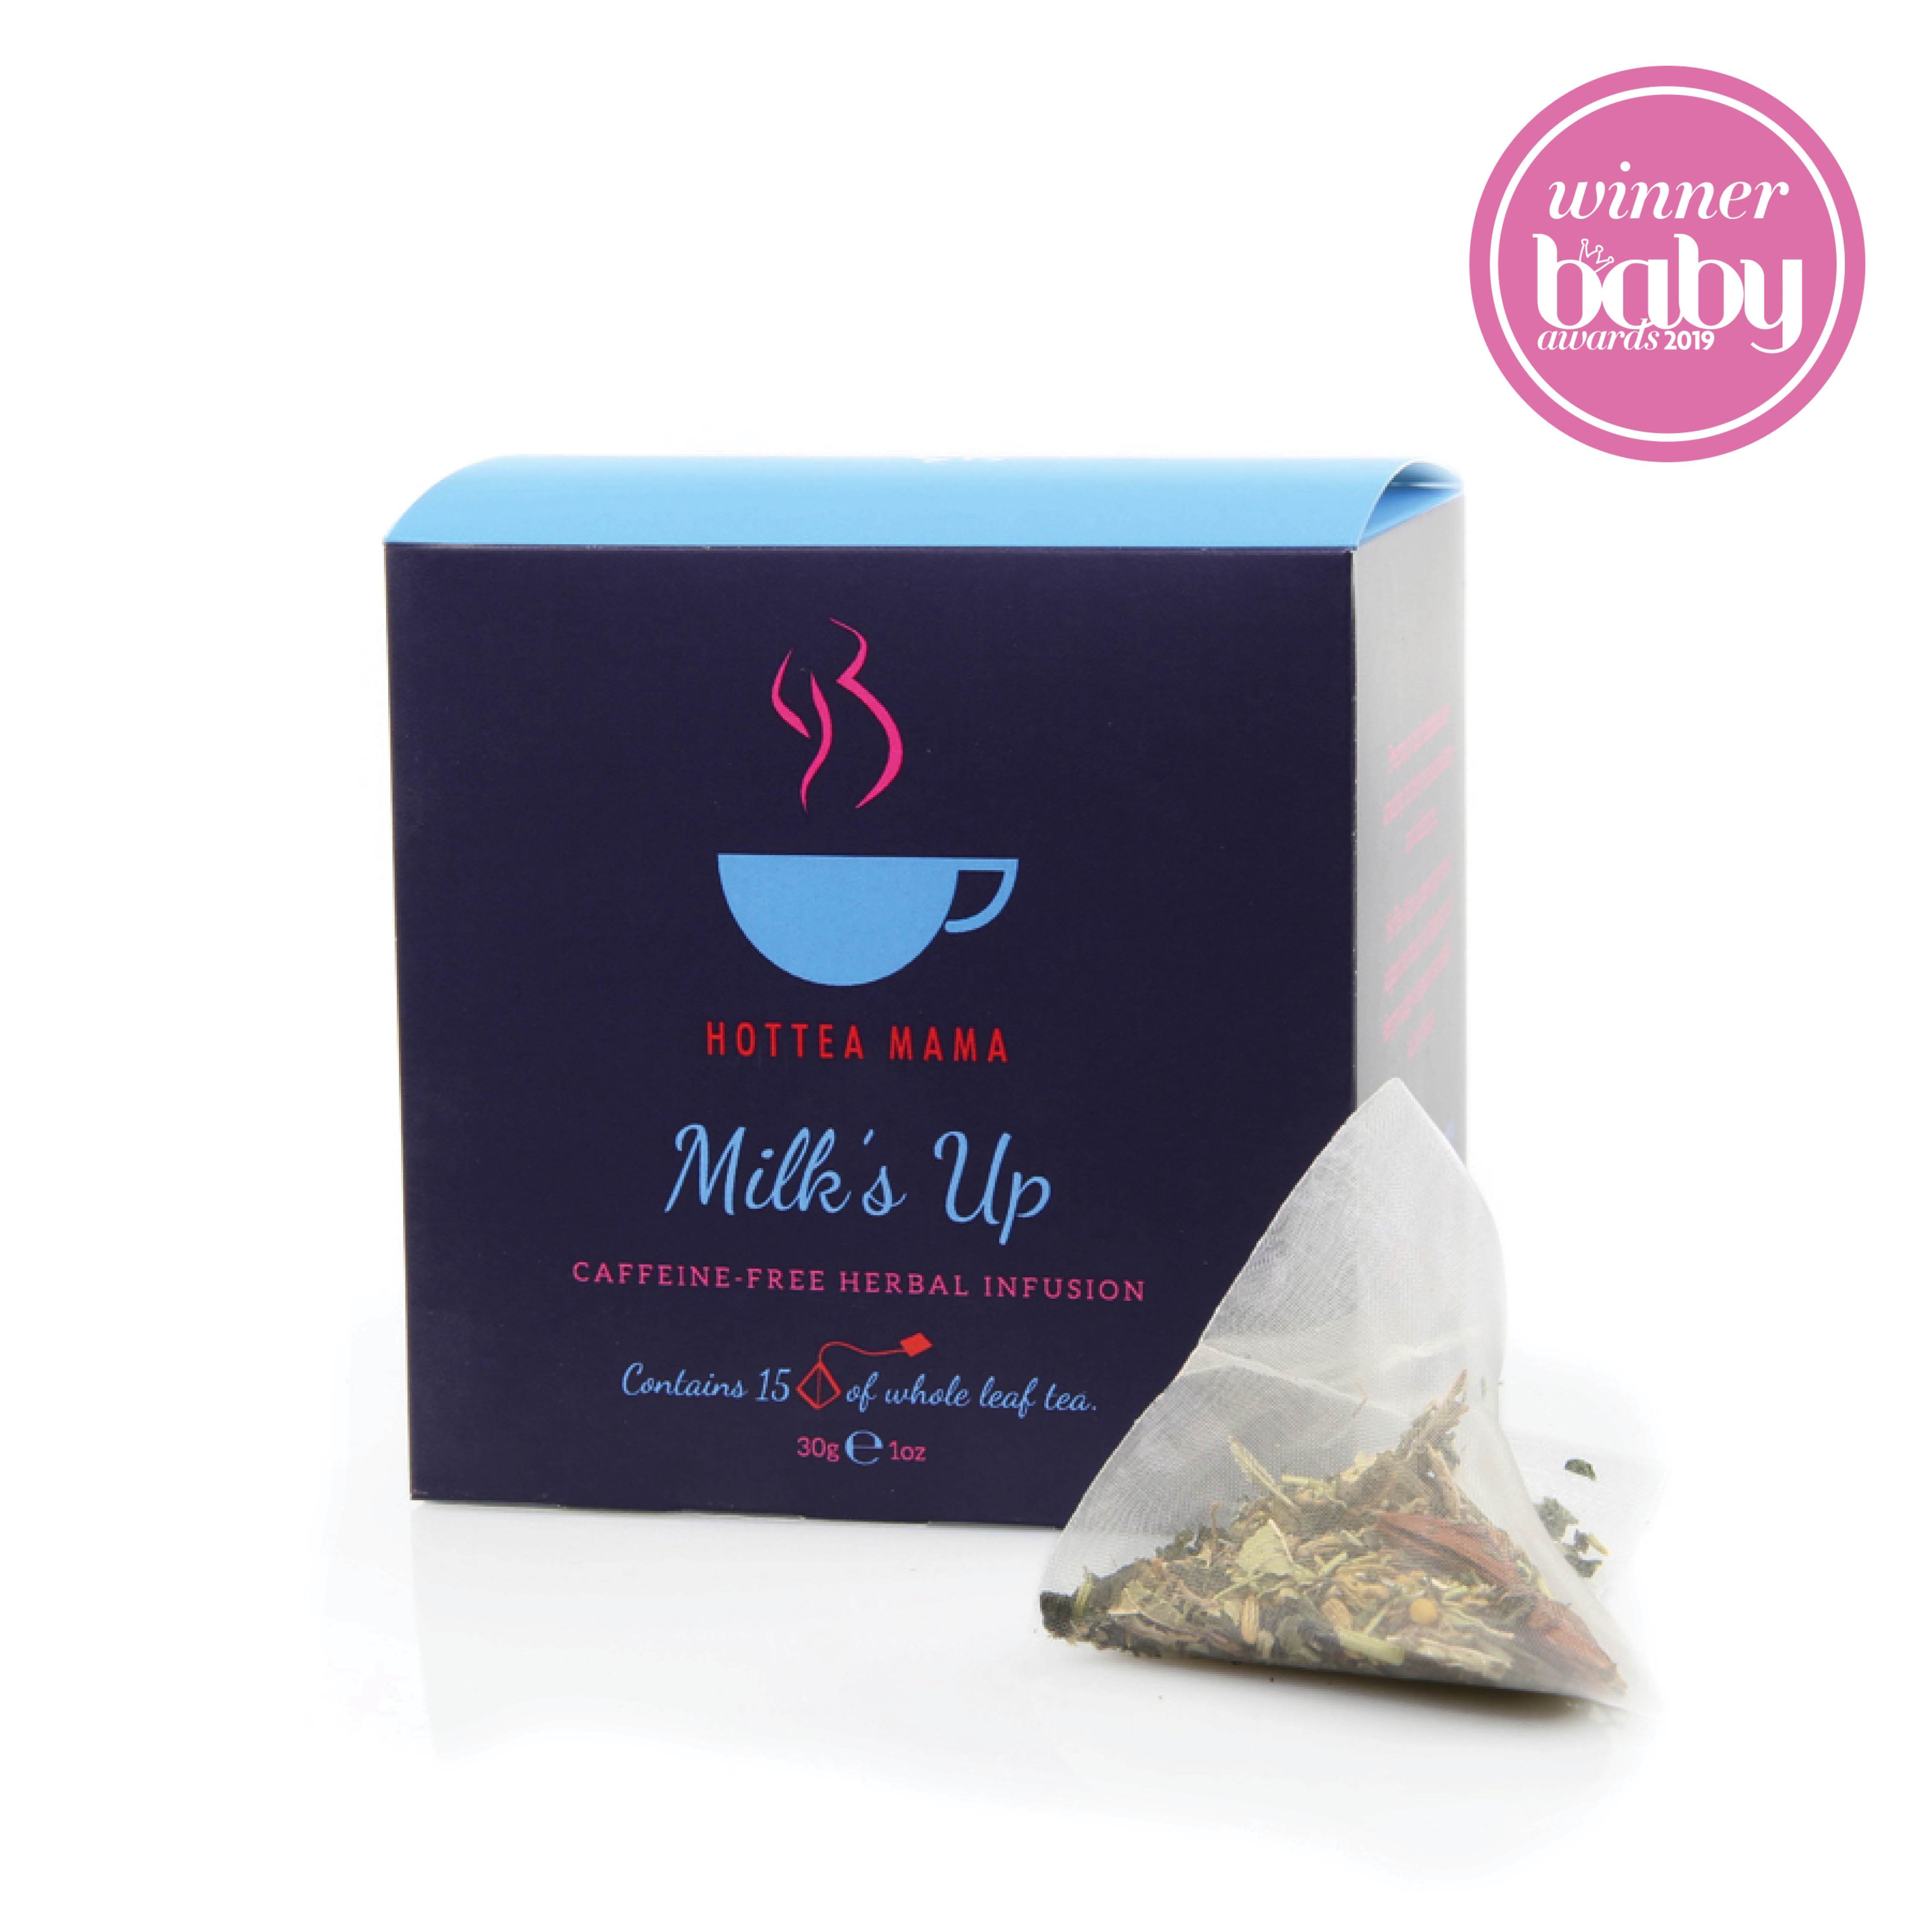 Milk's Up Breastfeeding Tea box with whole leaf tea bag and Baby Award Logo showing Best Maternity Product 2019